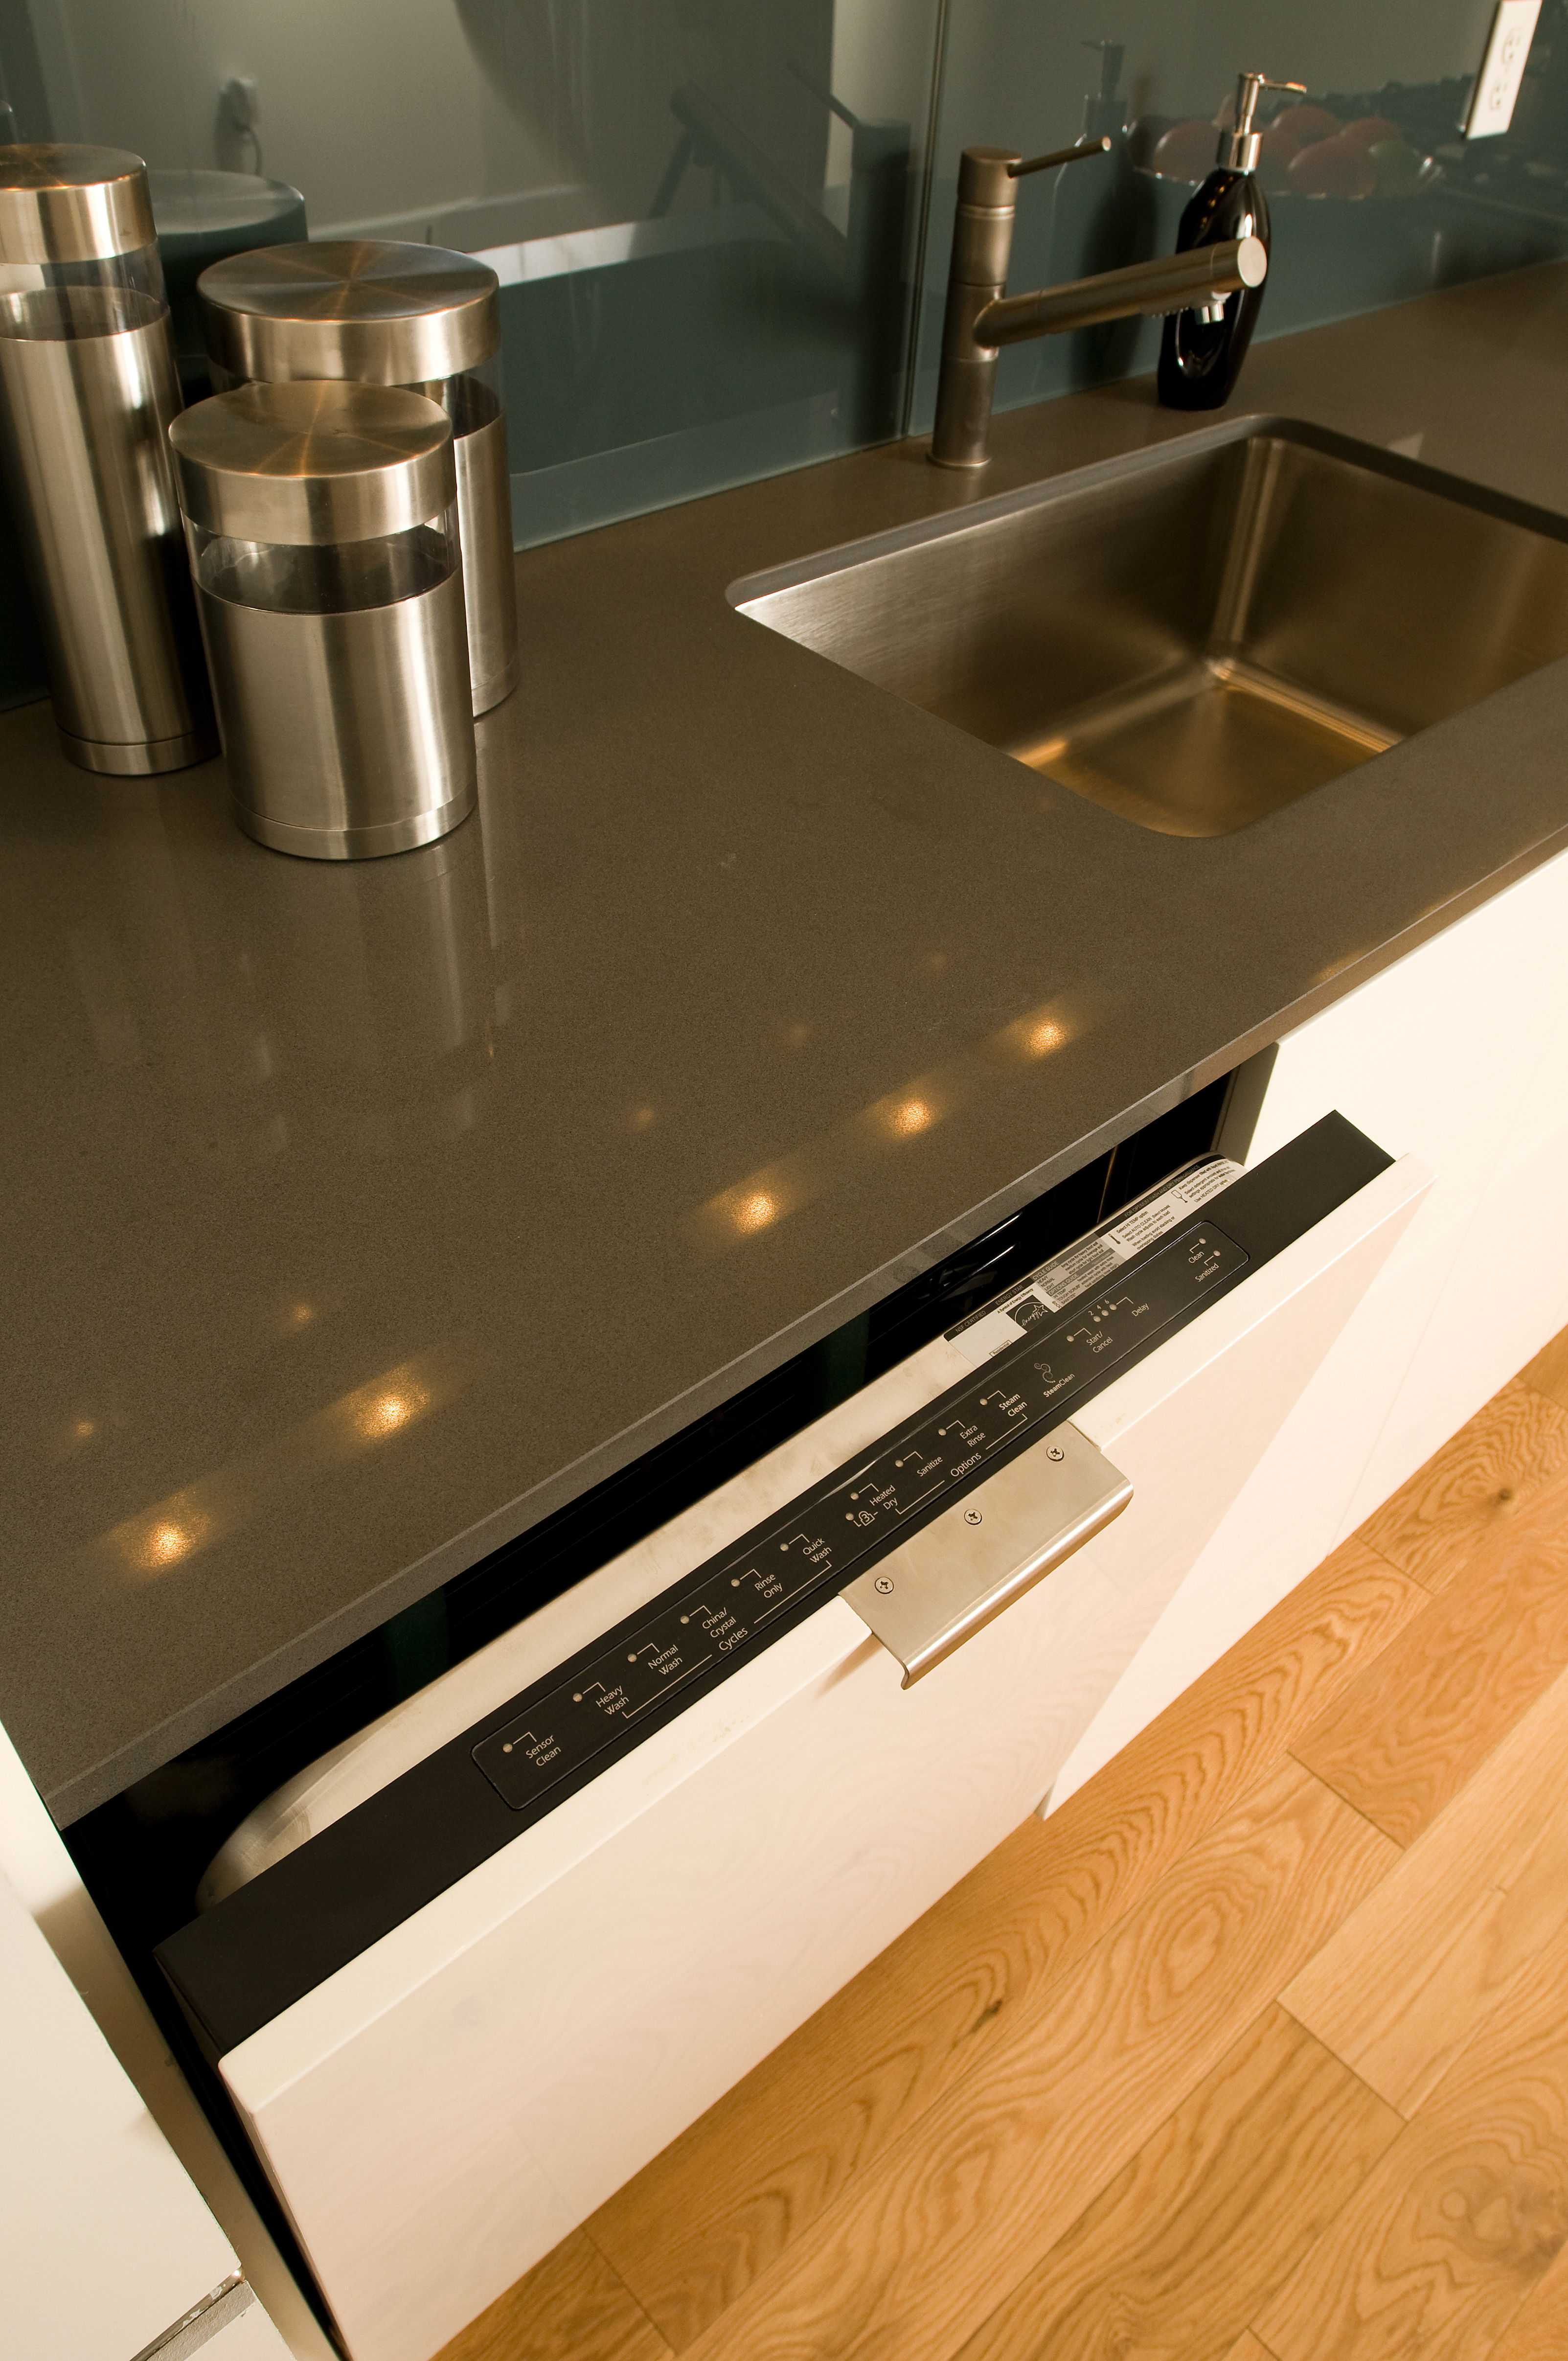 Get Quality Countertops The Affordable Way By Buying Remnants